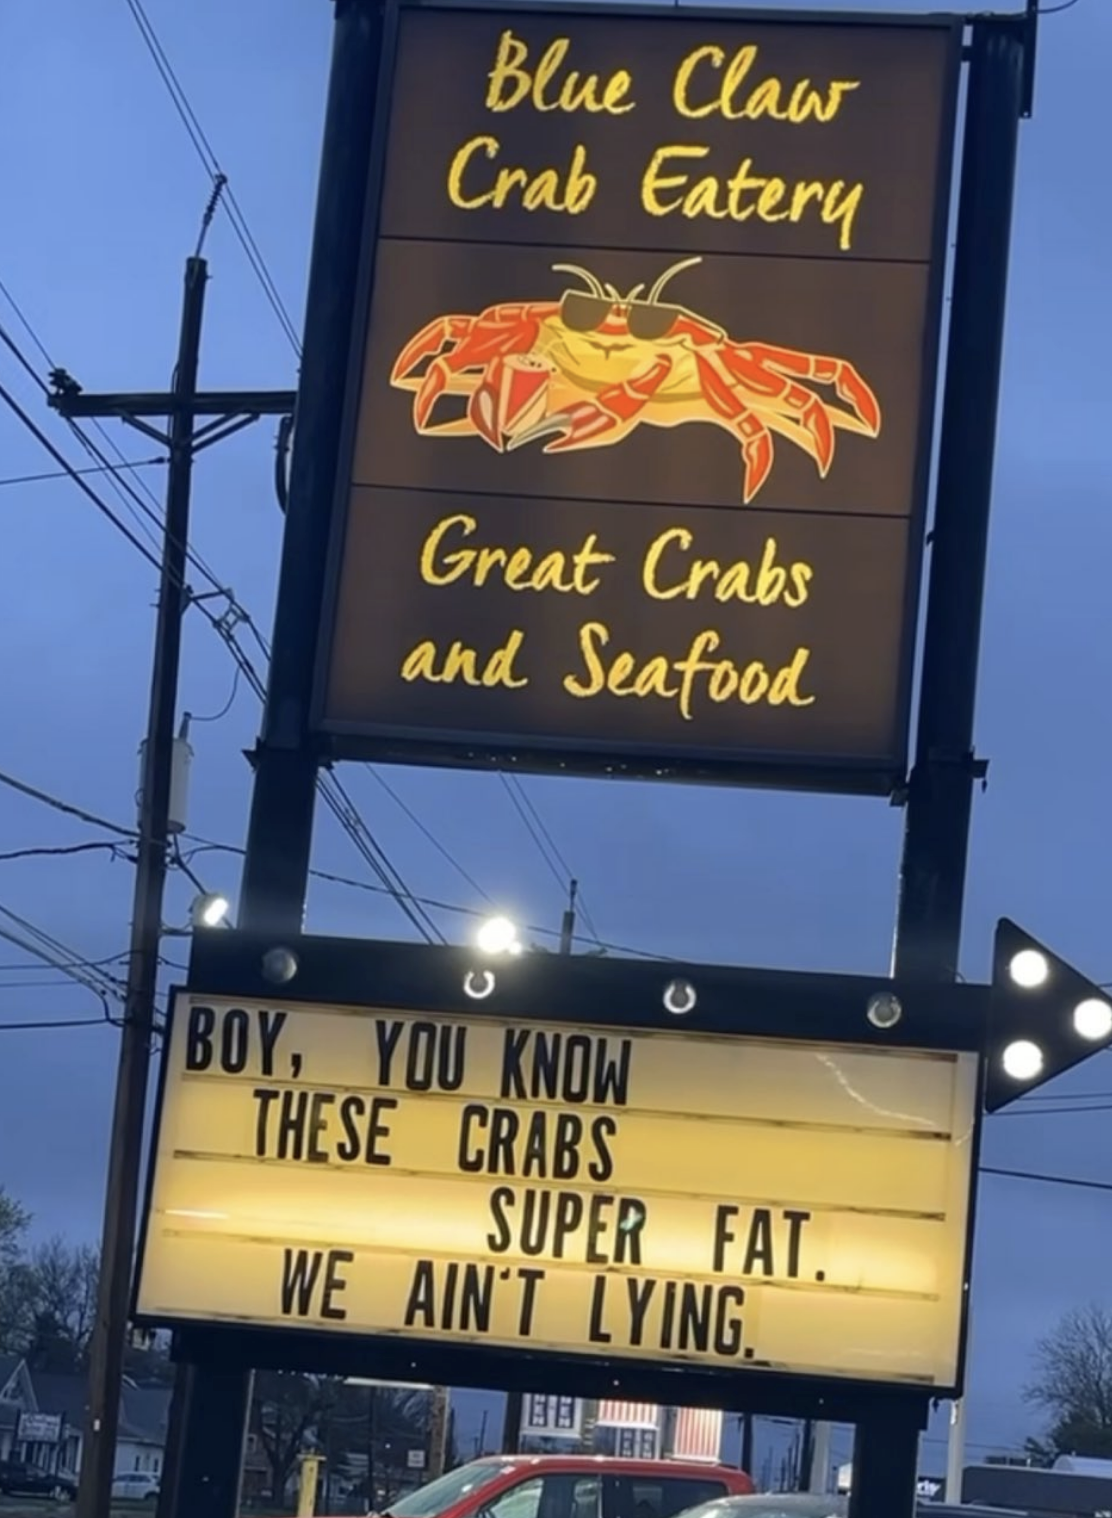 Signboard for Blue Claws Crab Eatery advertising &quot;Great Crabs and Seafood&quot; with a humorous message that says, &quot;Boy, you know these crabs super fat. We ain&#x27;t lying&quot;